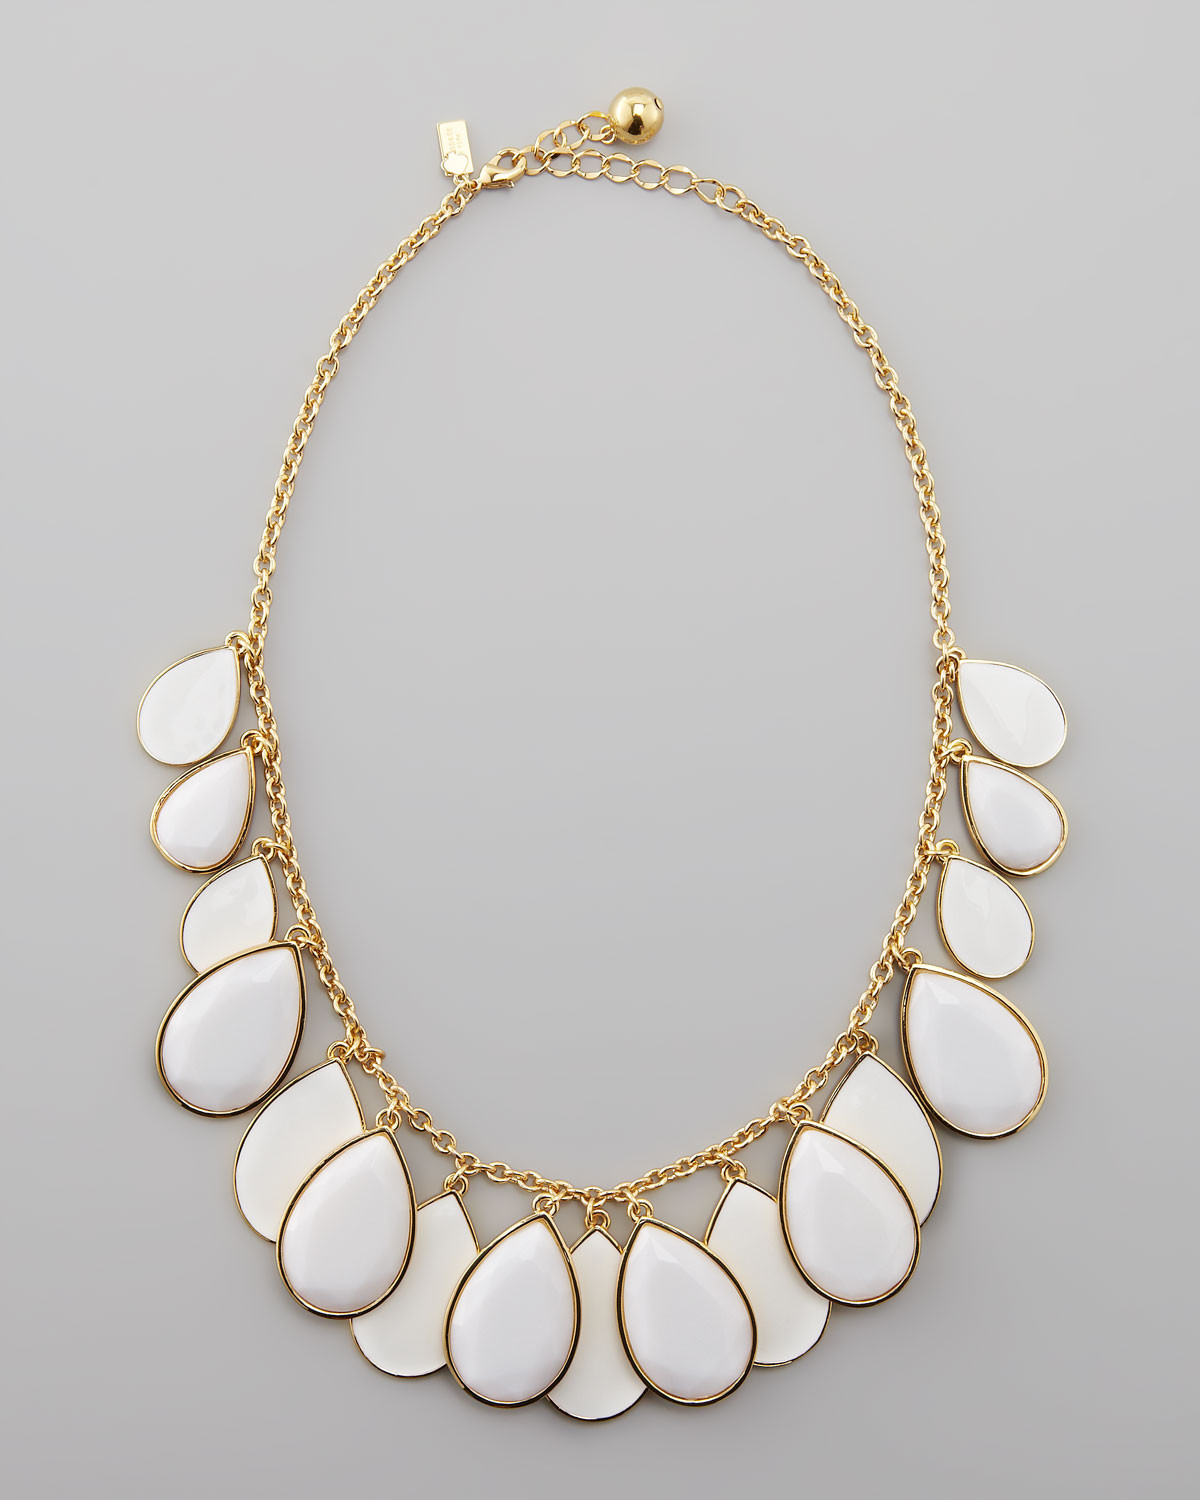 Kate Spade Necklaces
 Lyst Kate Spade Teardrop Necklace in White